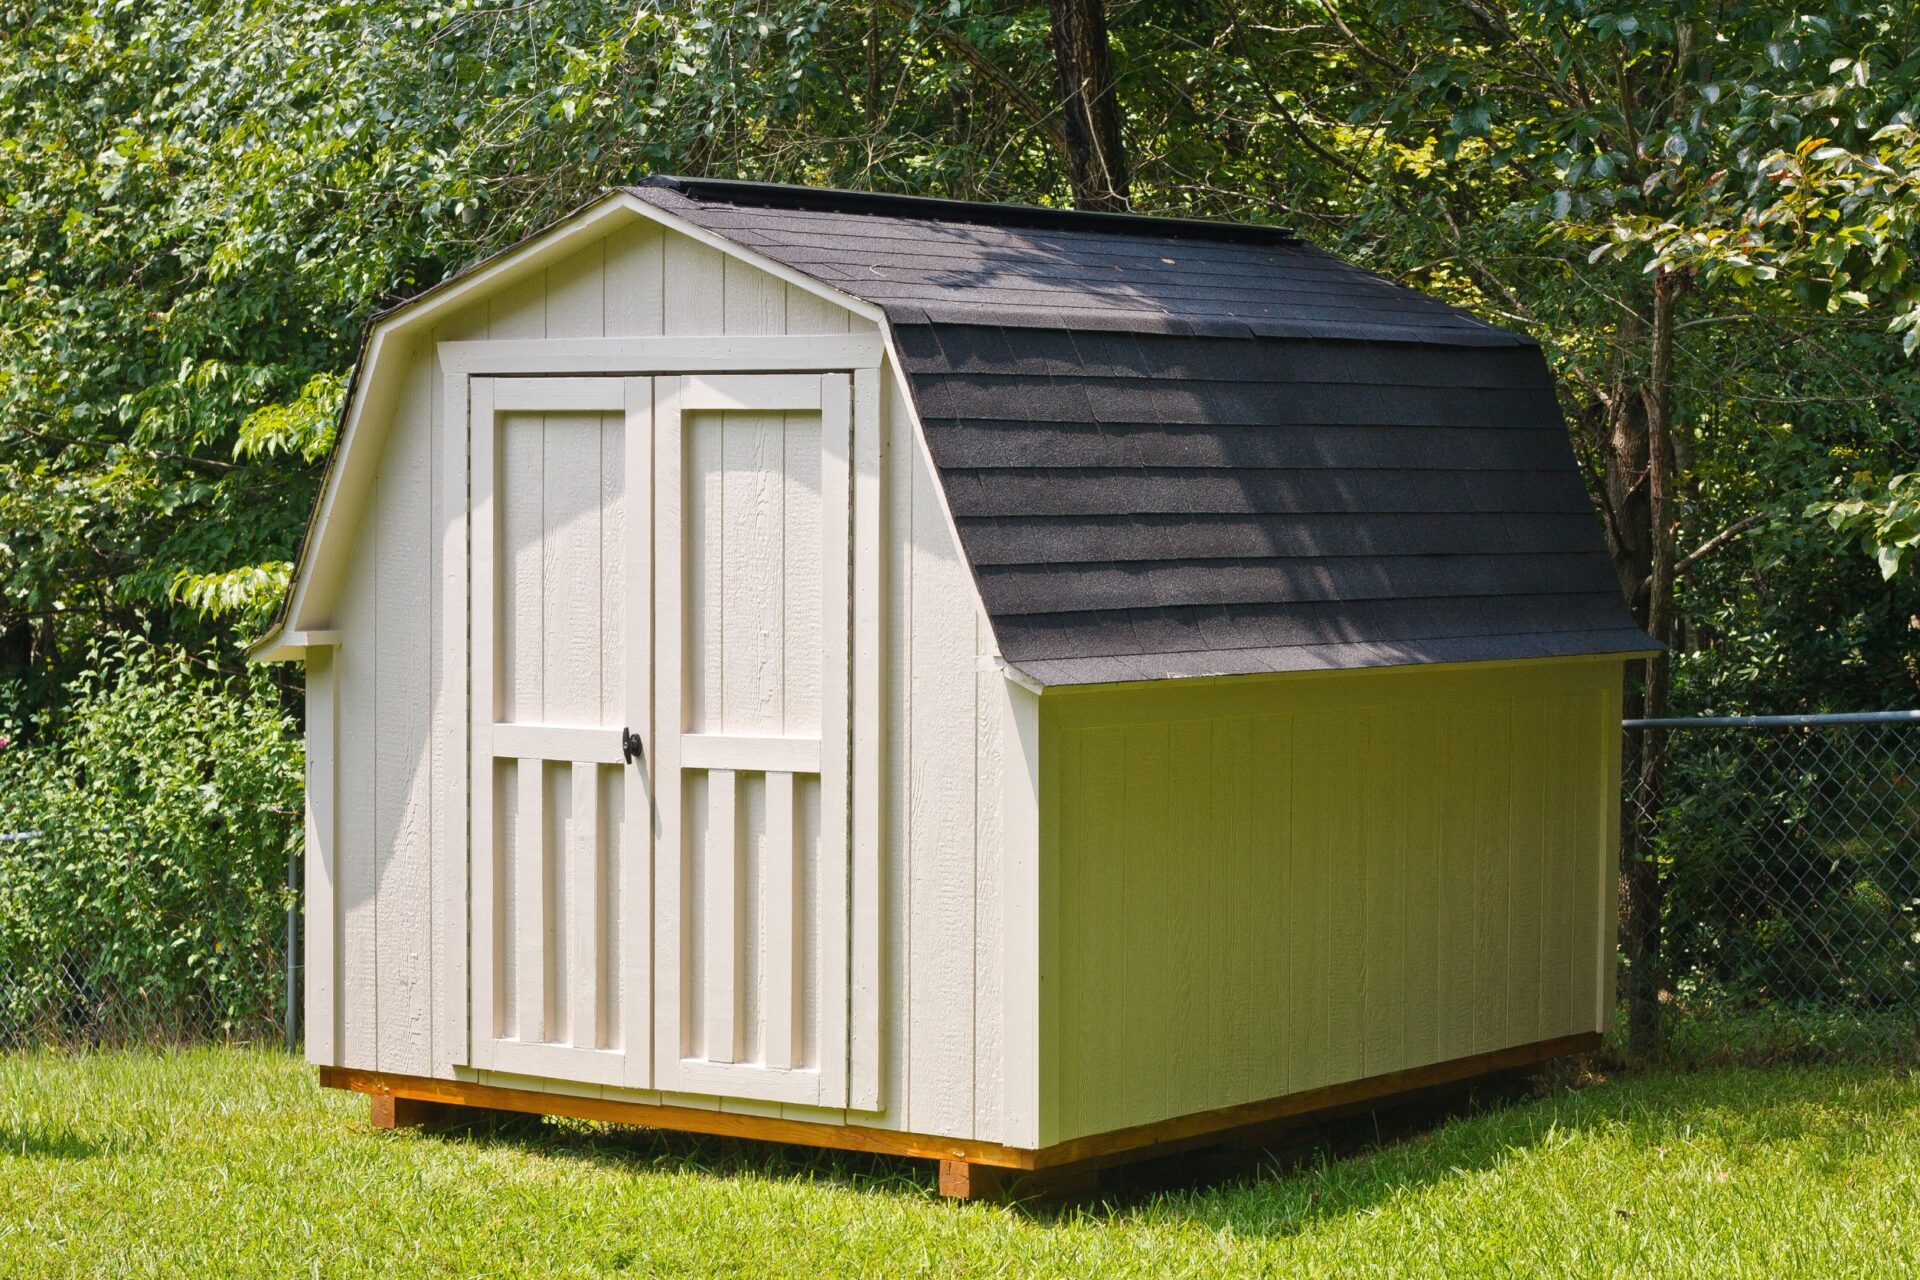 A wood utility shed in a back yard